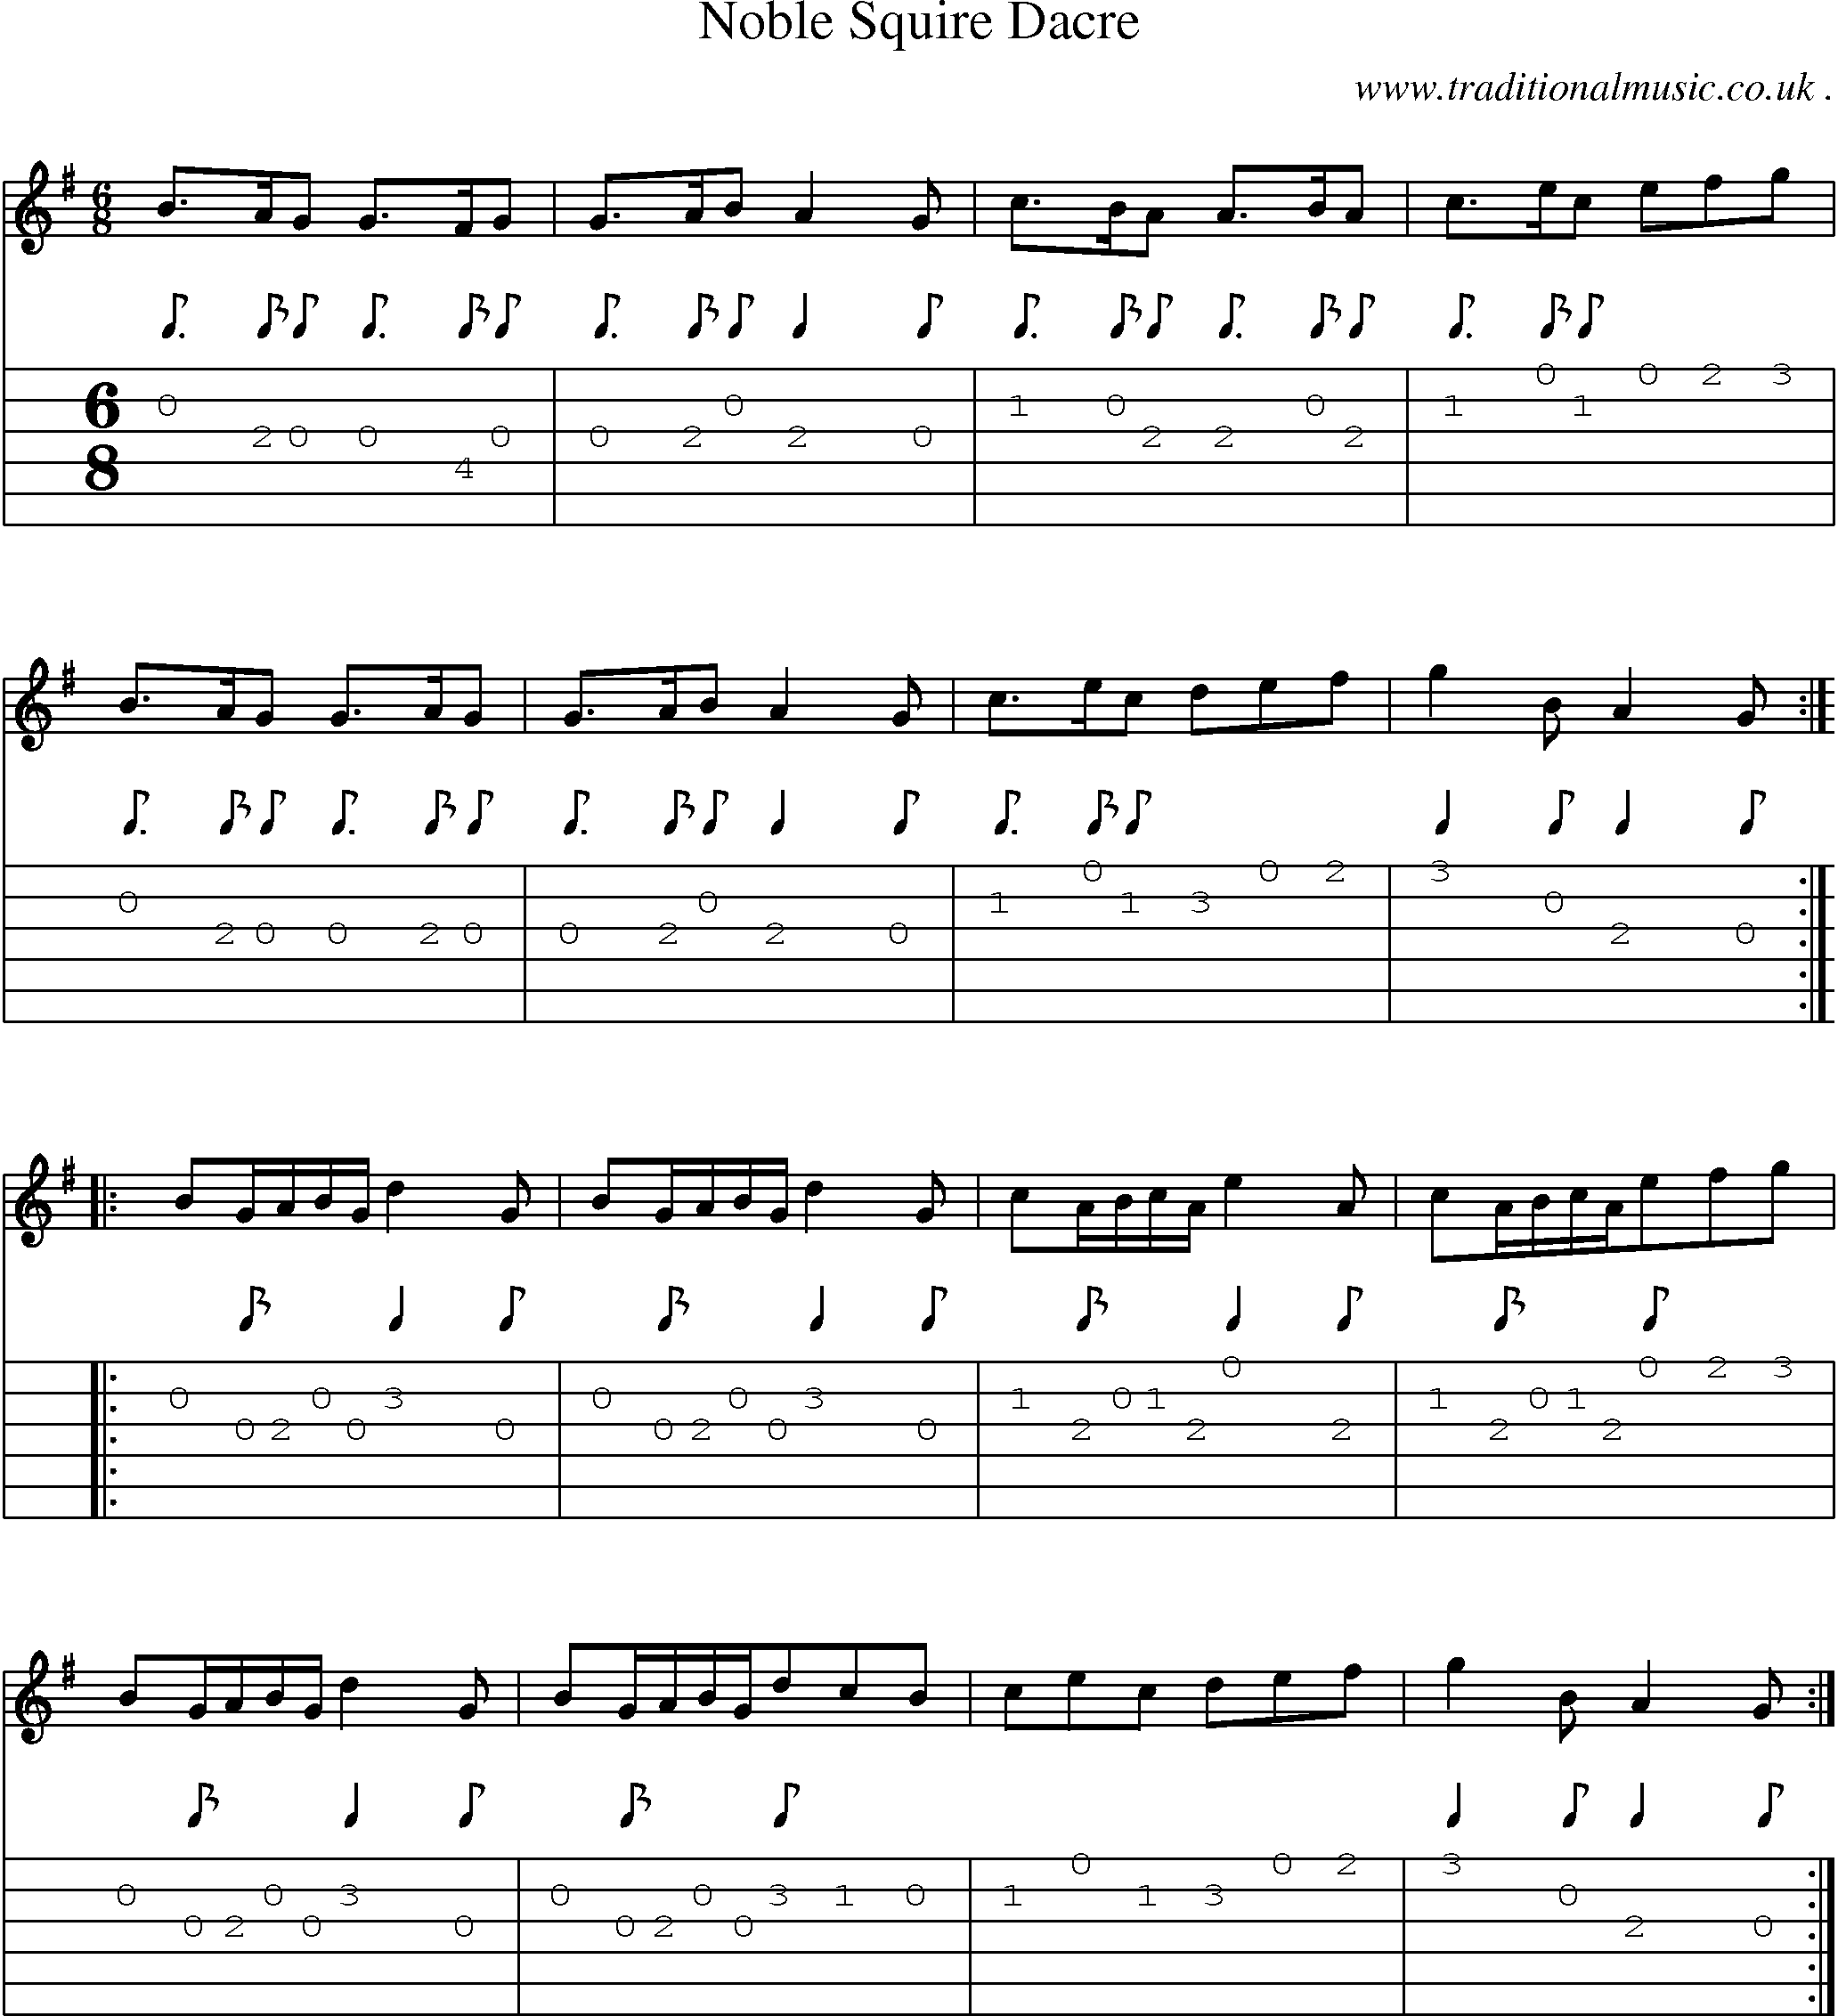 Sheet-Music and Guitar Tabs for Noble Squire Dacre